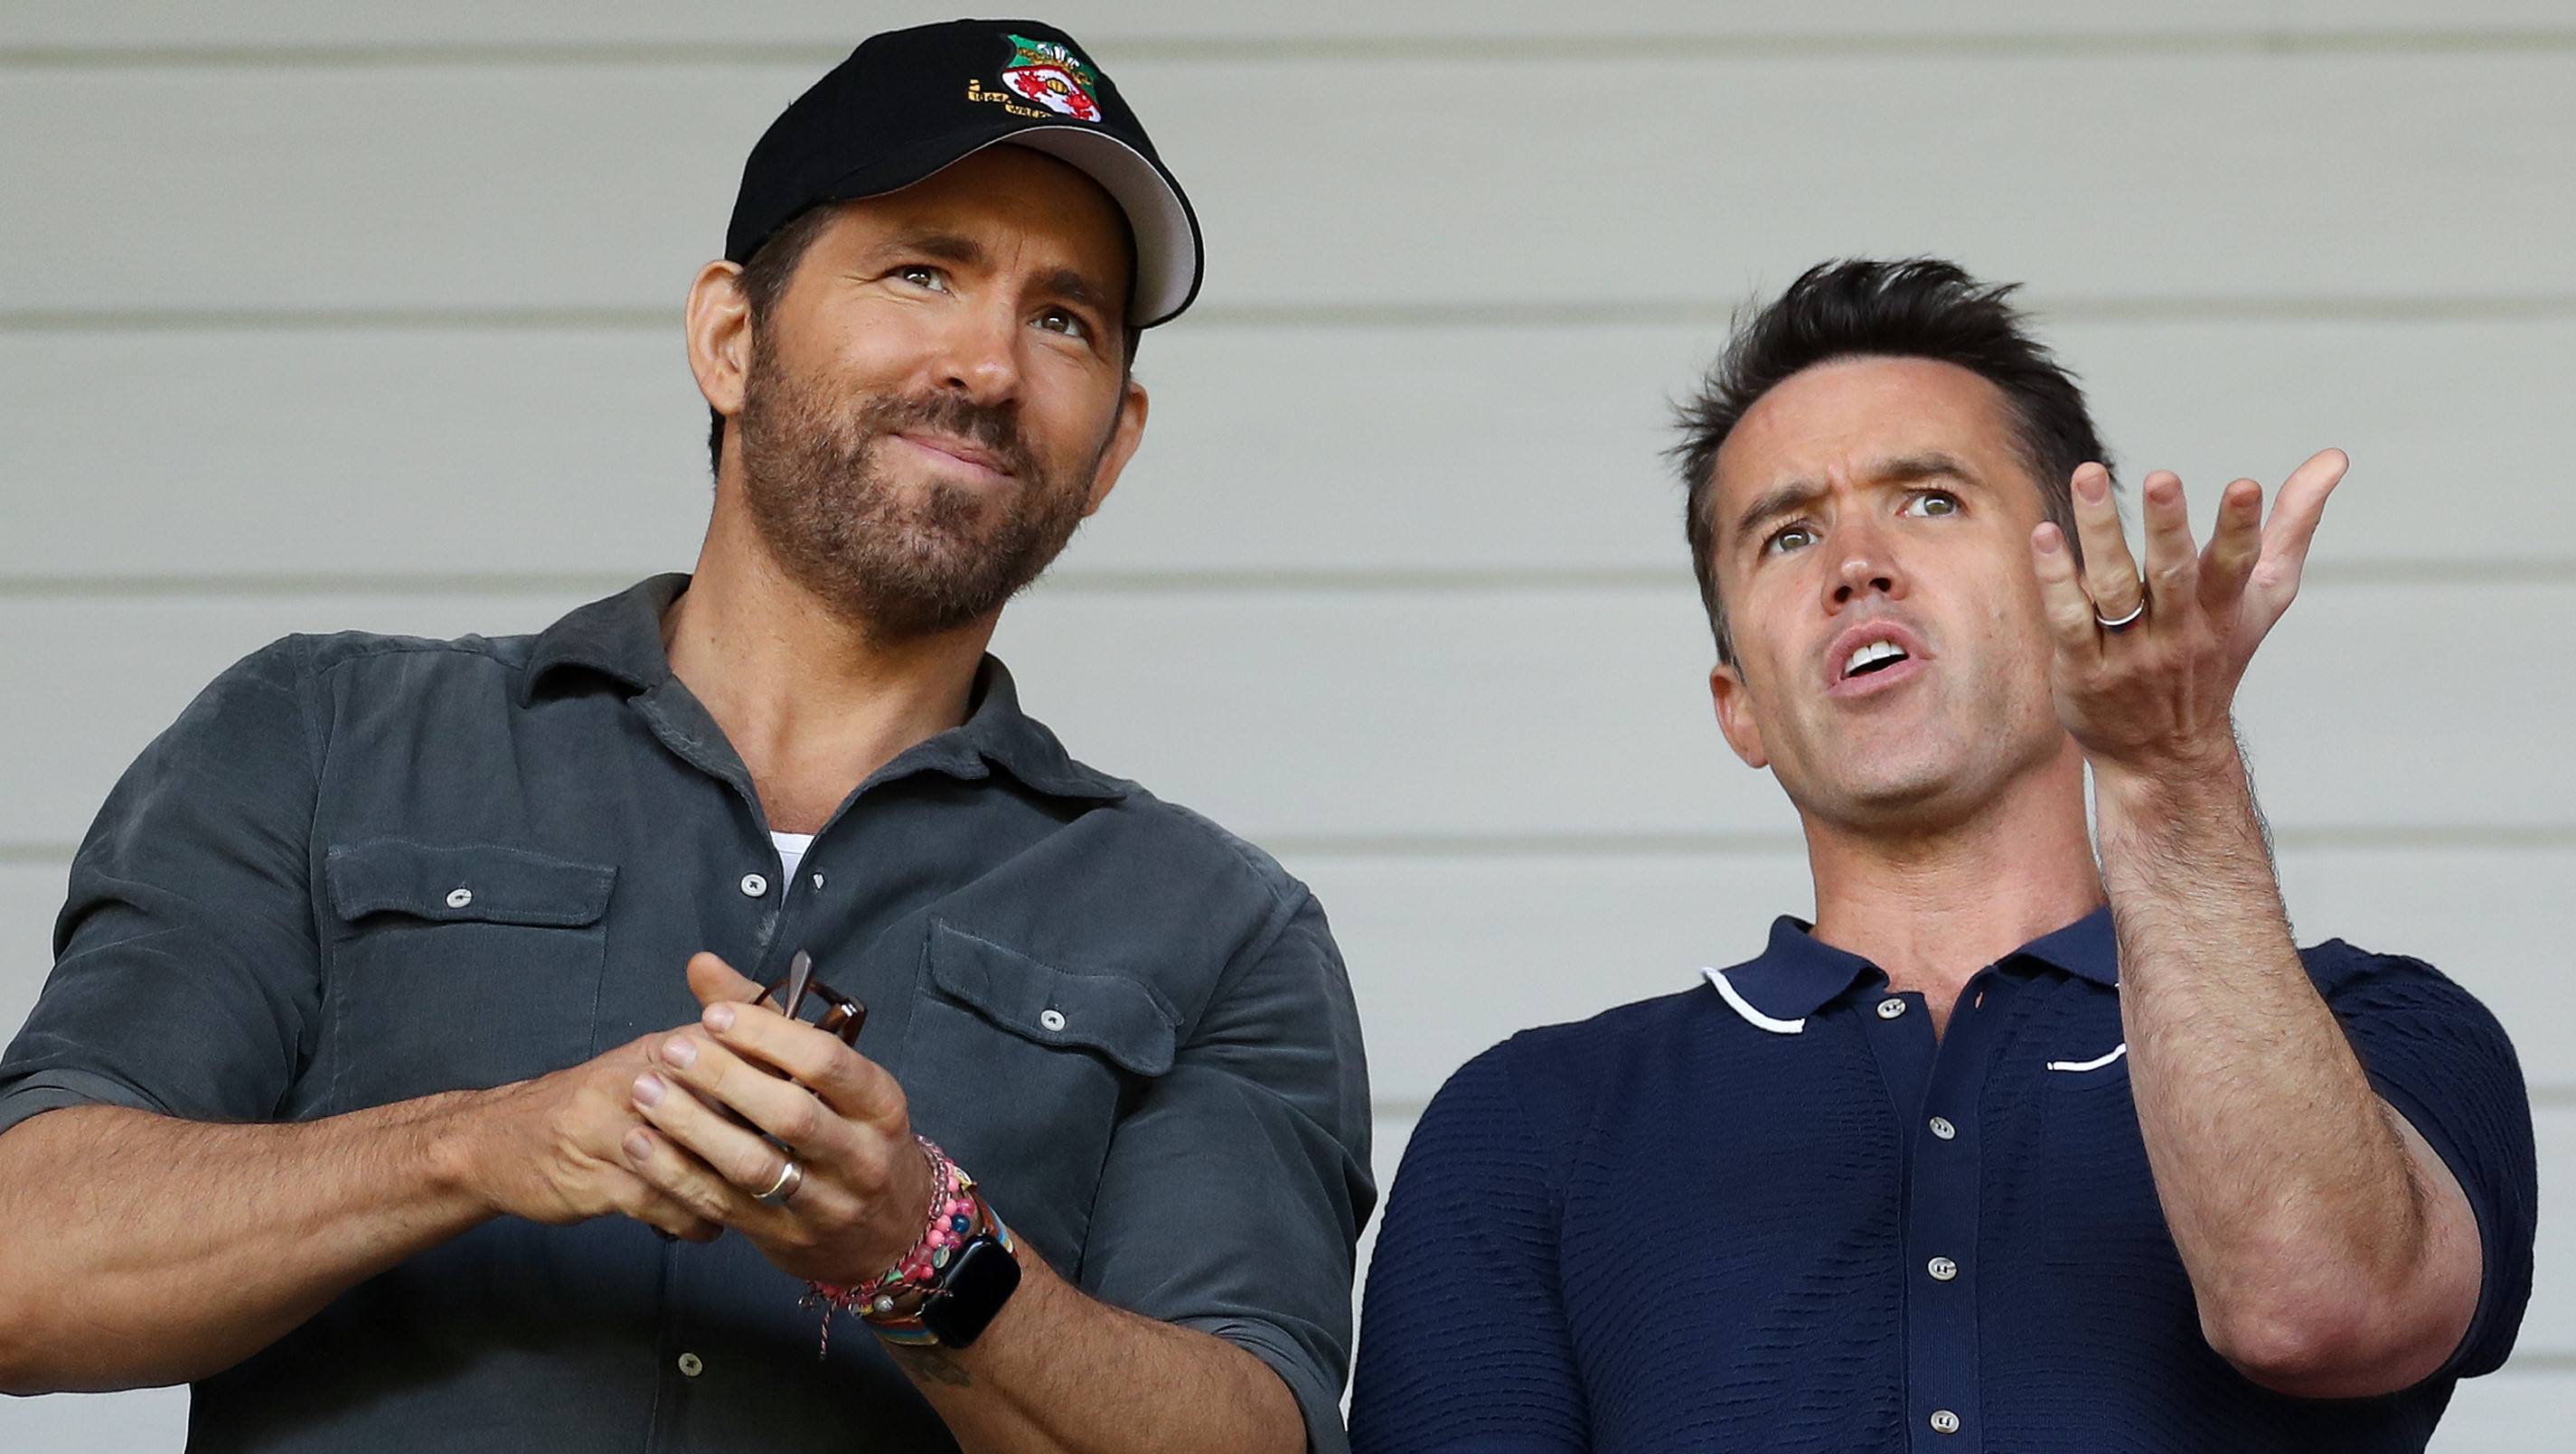  Ryan Reynolds and Rob McElhenney Easter eggs discovered in FIFA 23 